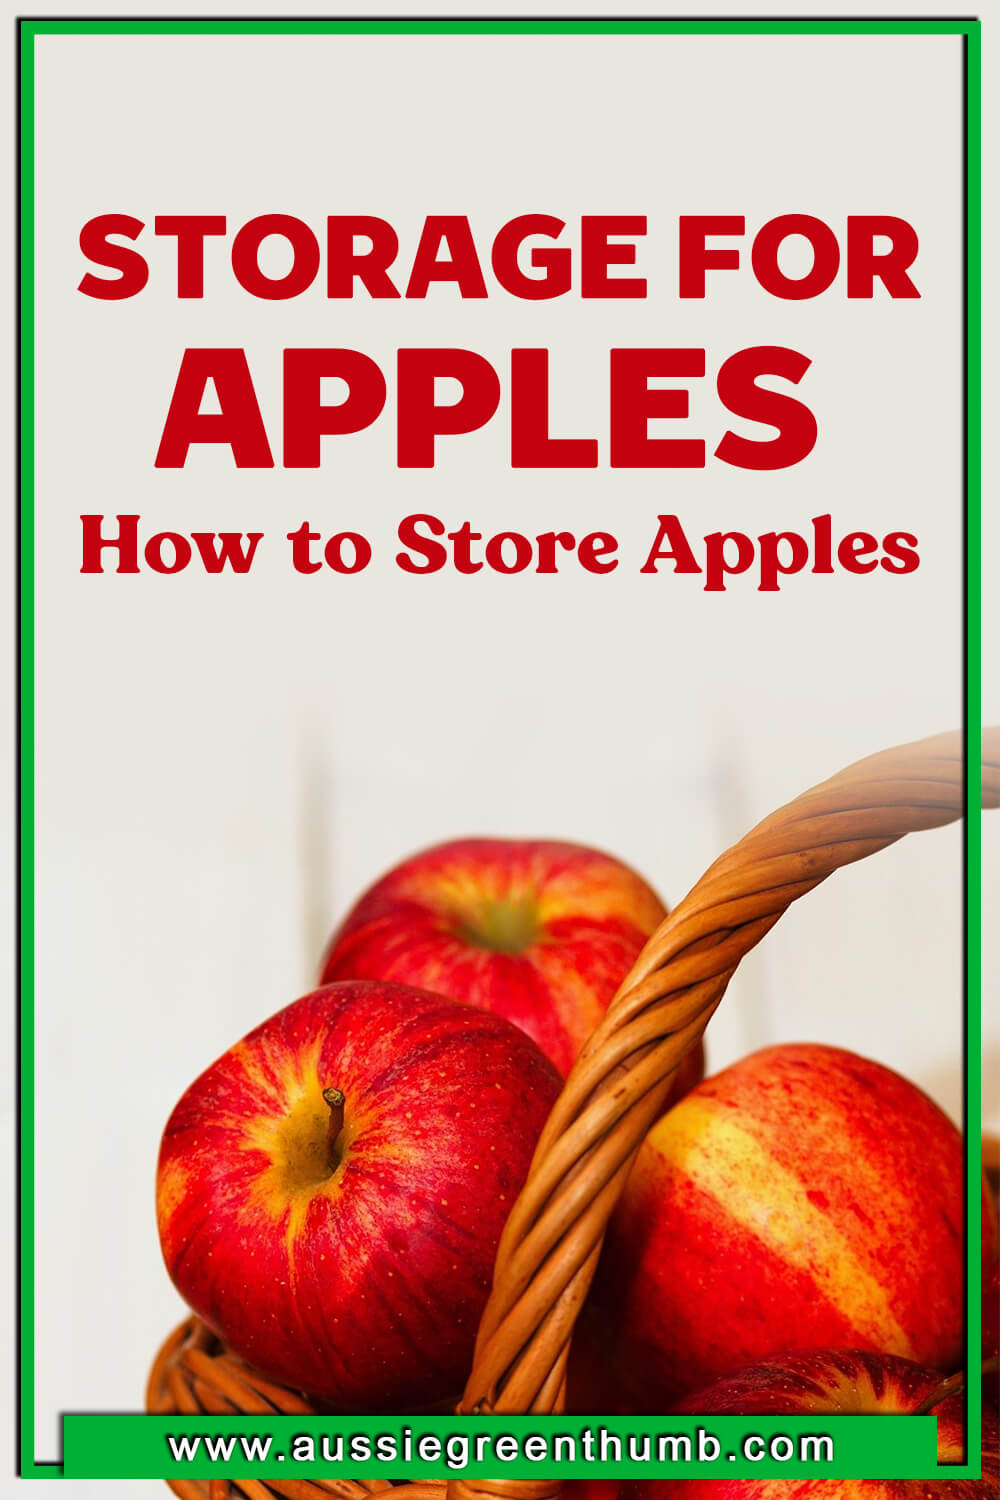 Storage for Apples – How to Store Apples